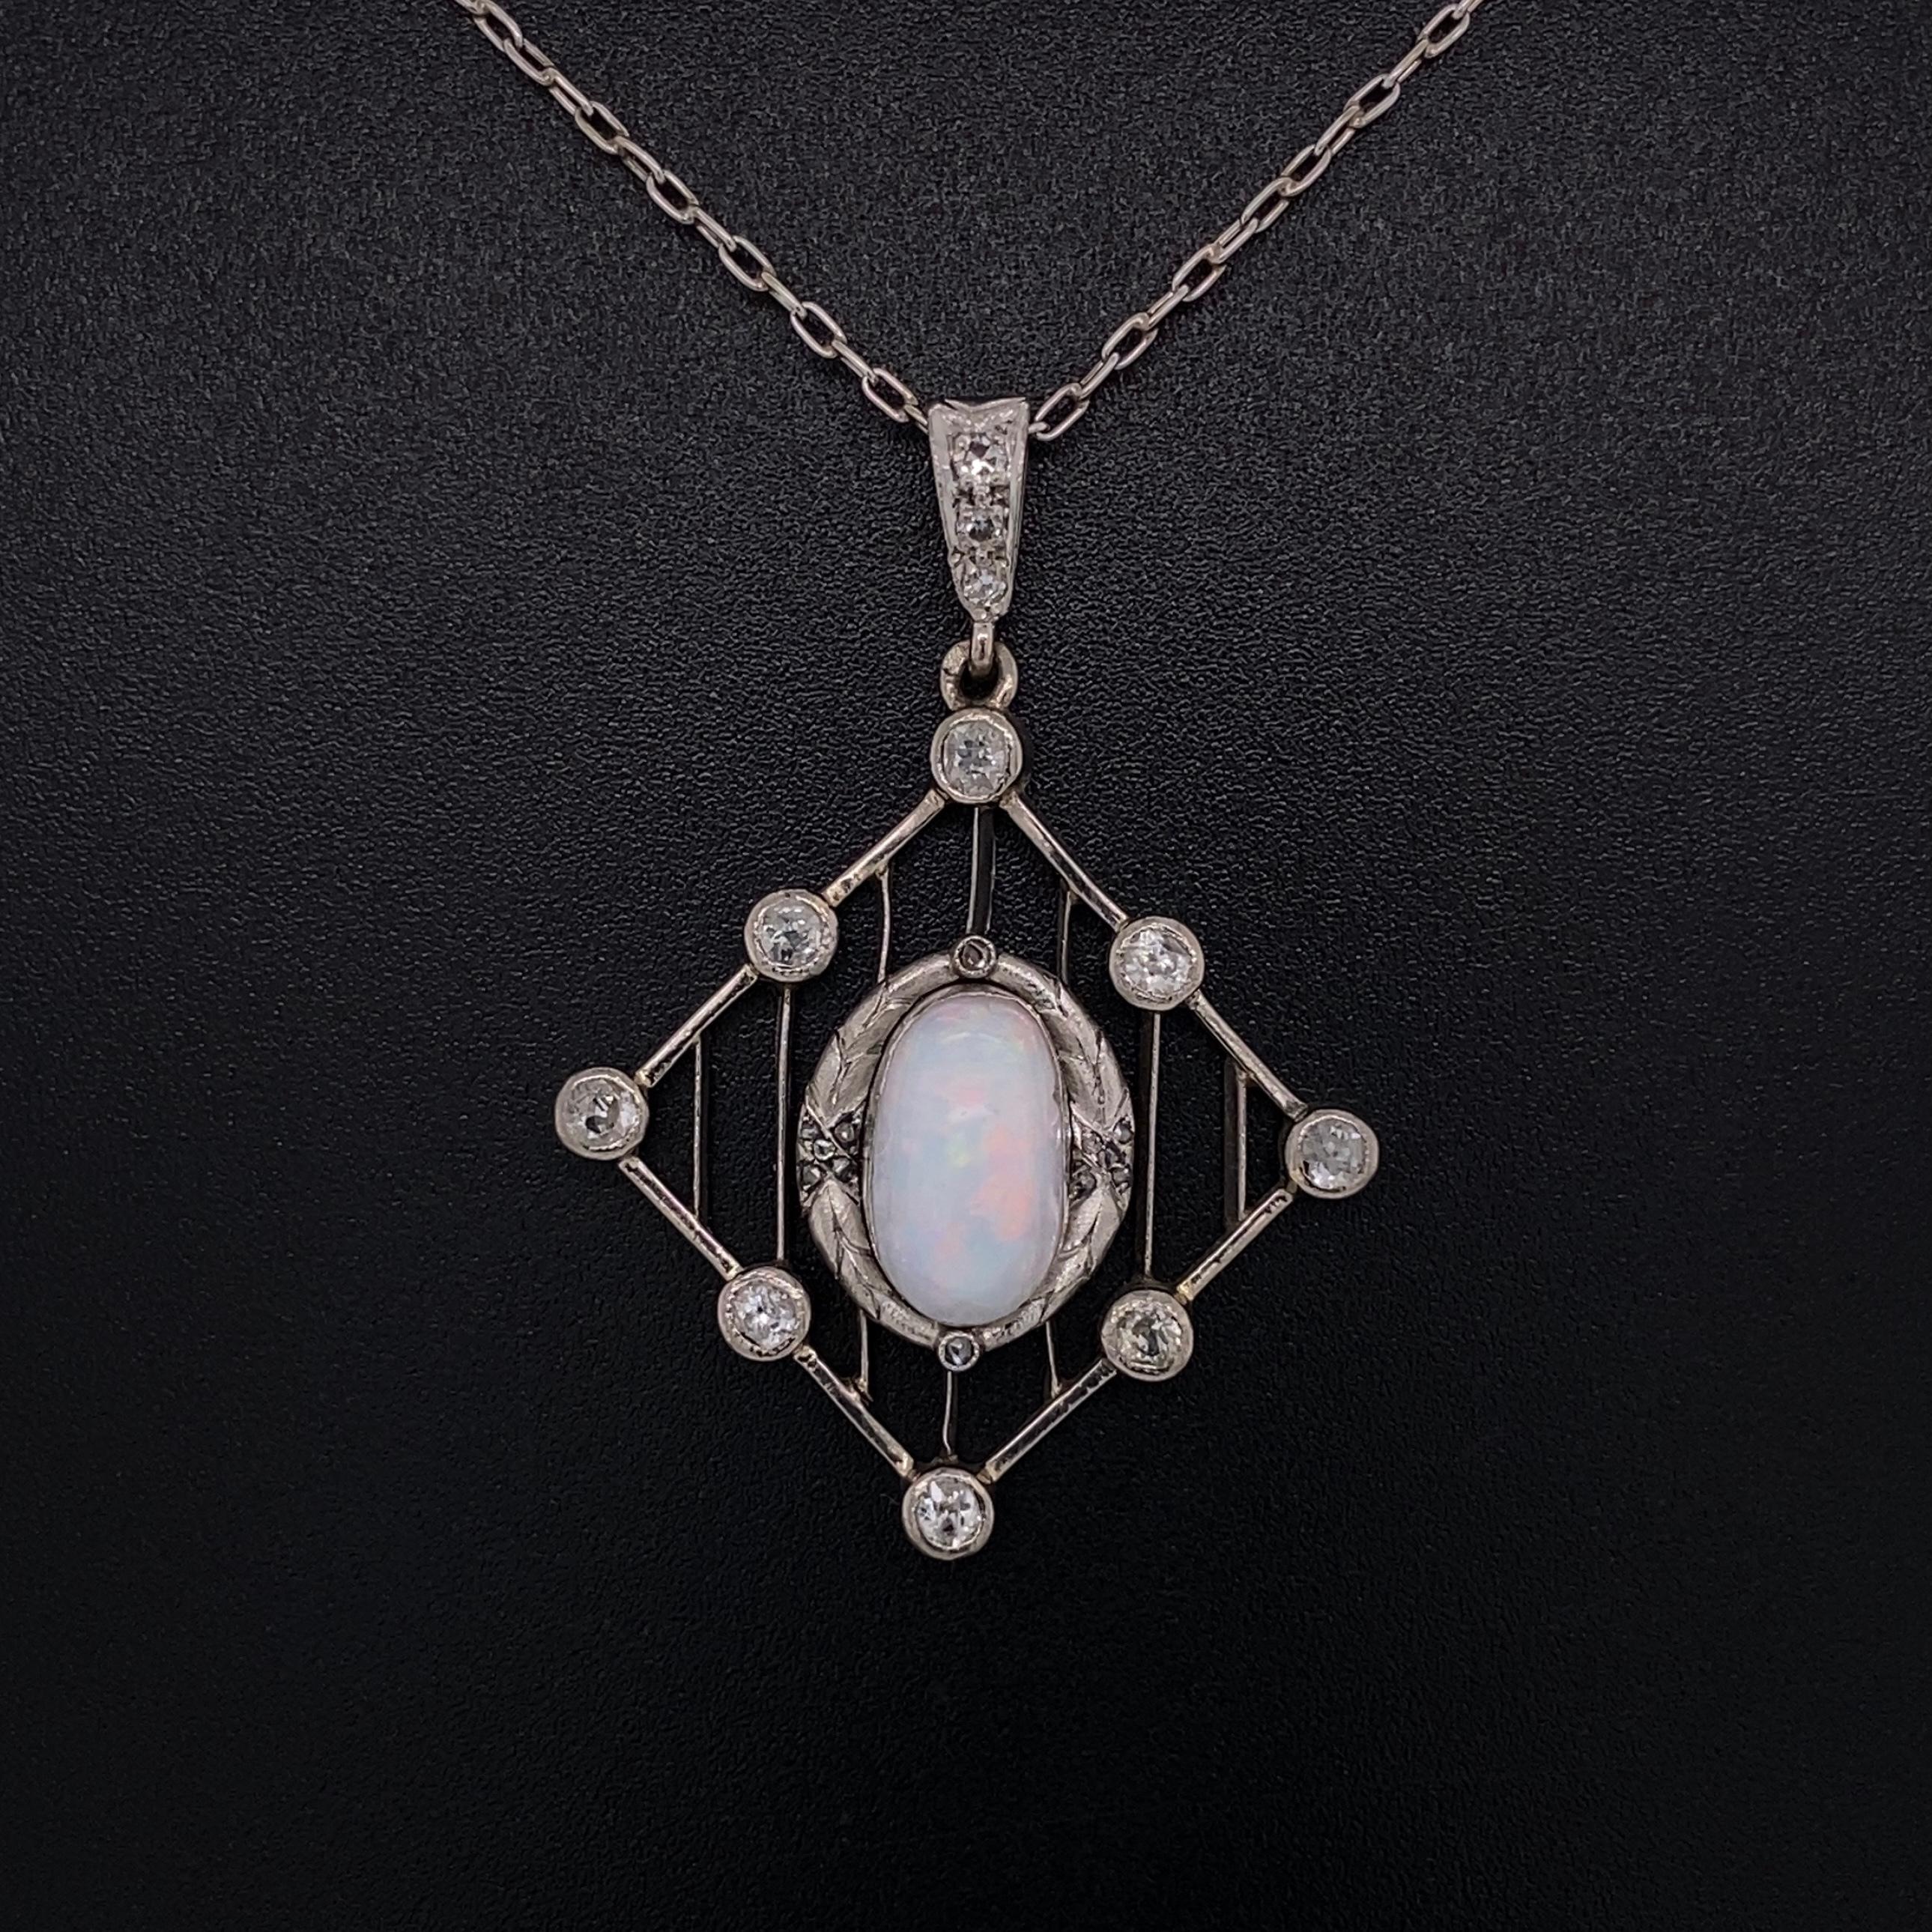 Simply Beautiful! Australian Crystal Opal and Diamond Platinum Art Deco Pendant Necklace. Center securely Hand set with an Australian Crystal Opal surrounded by 11 round old Mine-cut Diamonds, approx. 0.80tcw. Beautiful design Hand crafted in